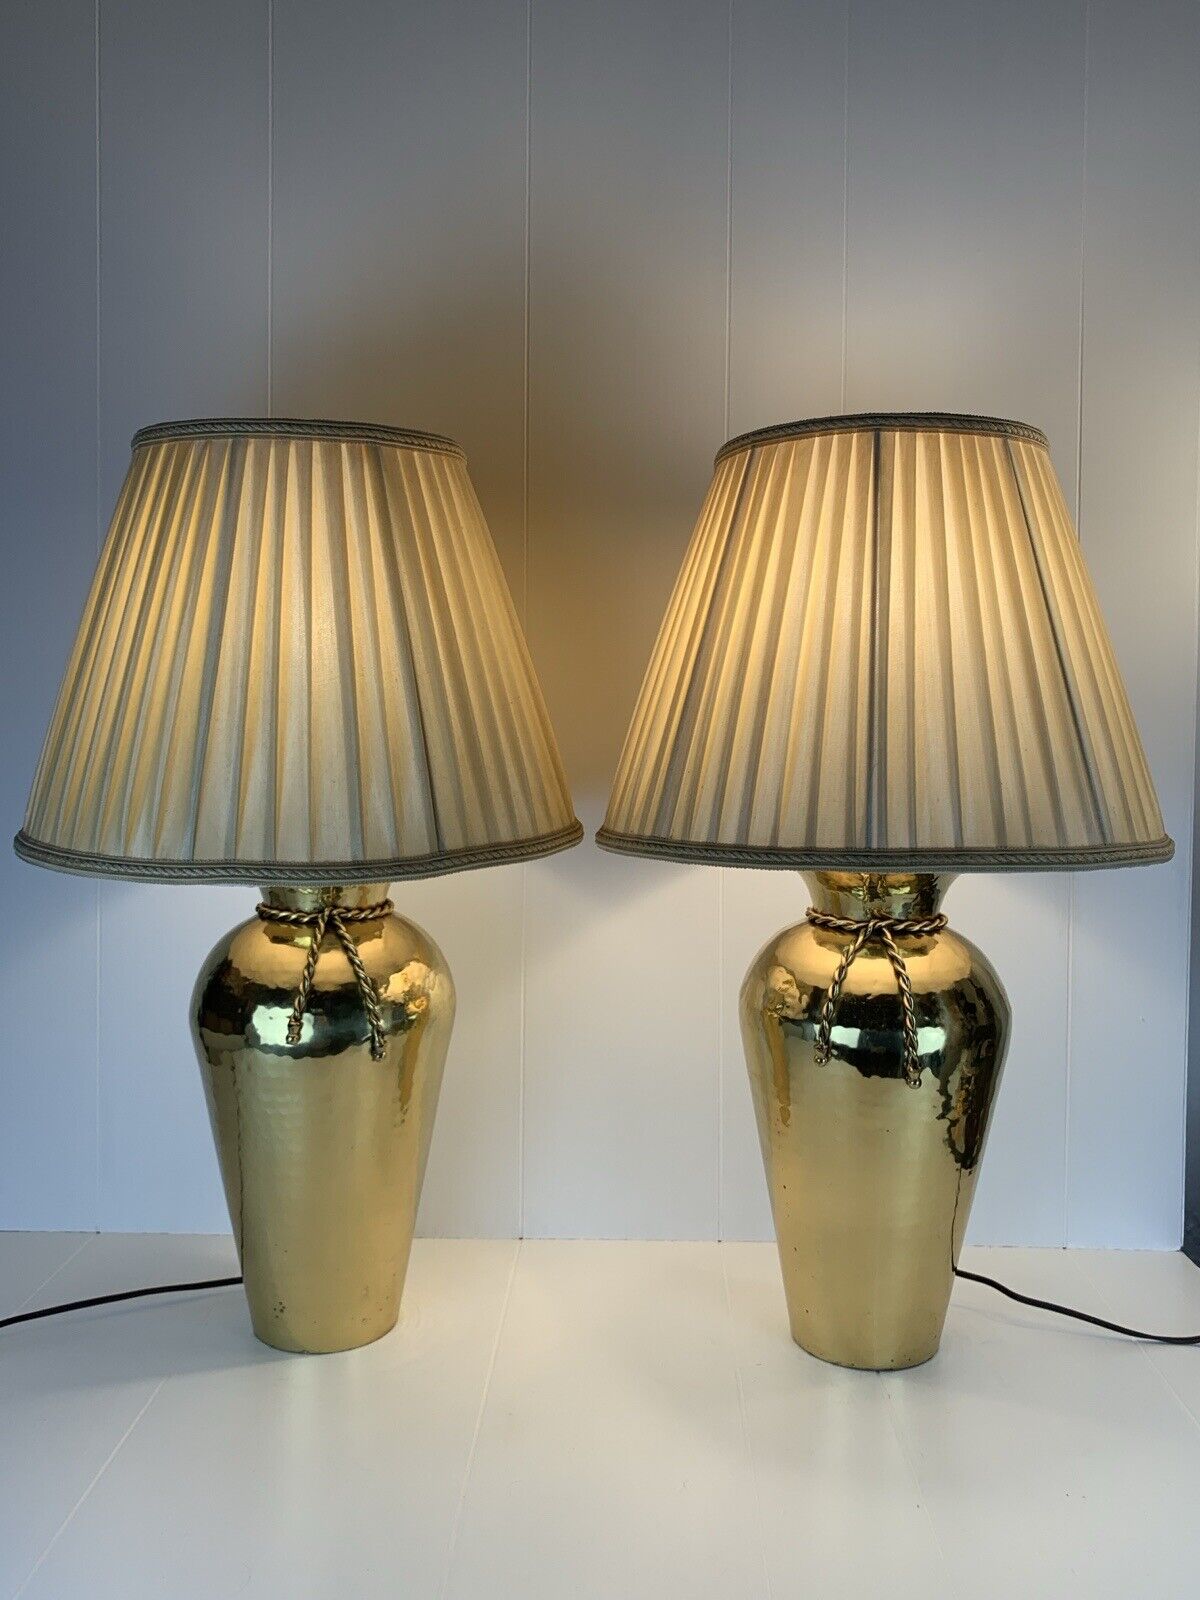 PAIR OF VINTAGE BRASS TABLE LAMPS WITH RUFFLED METAL DETAIL / Shades not include